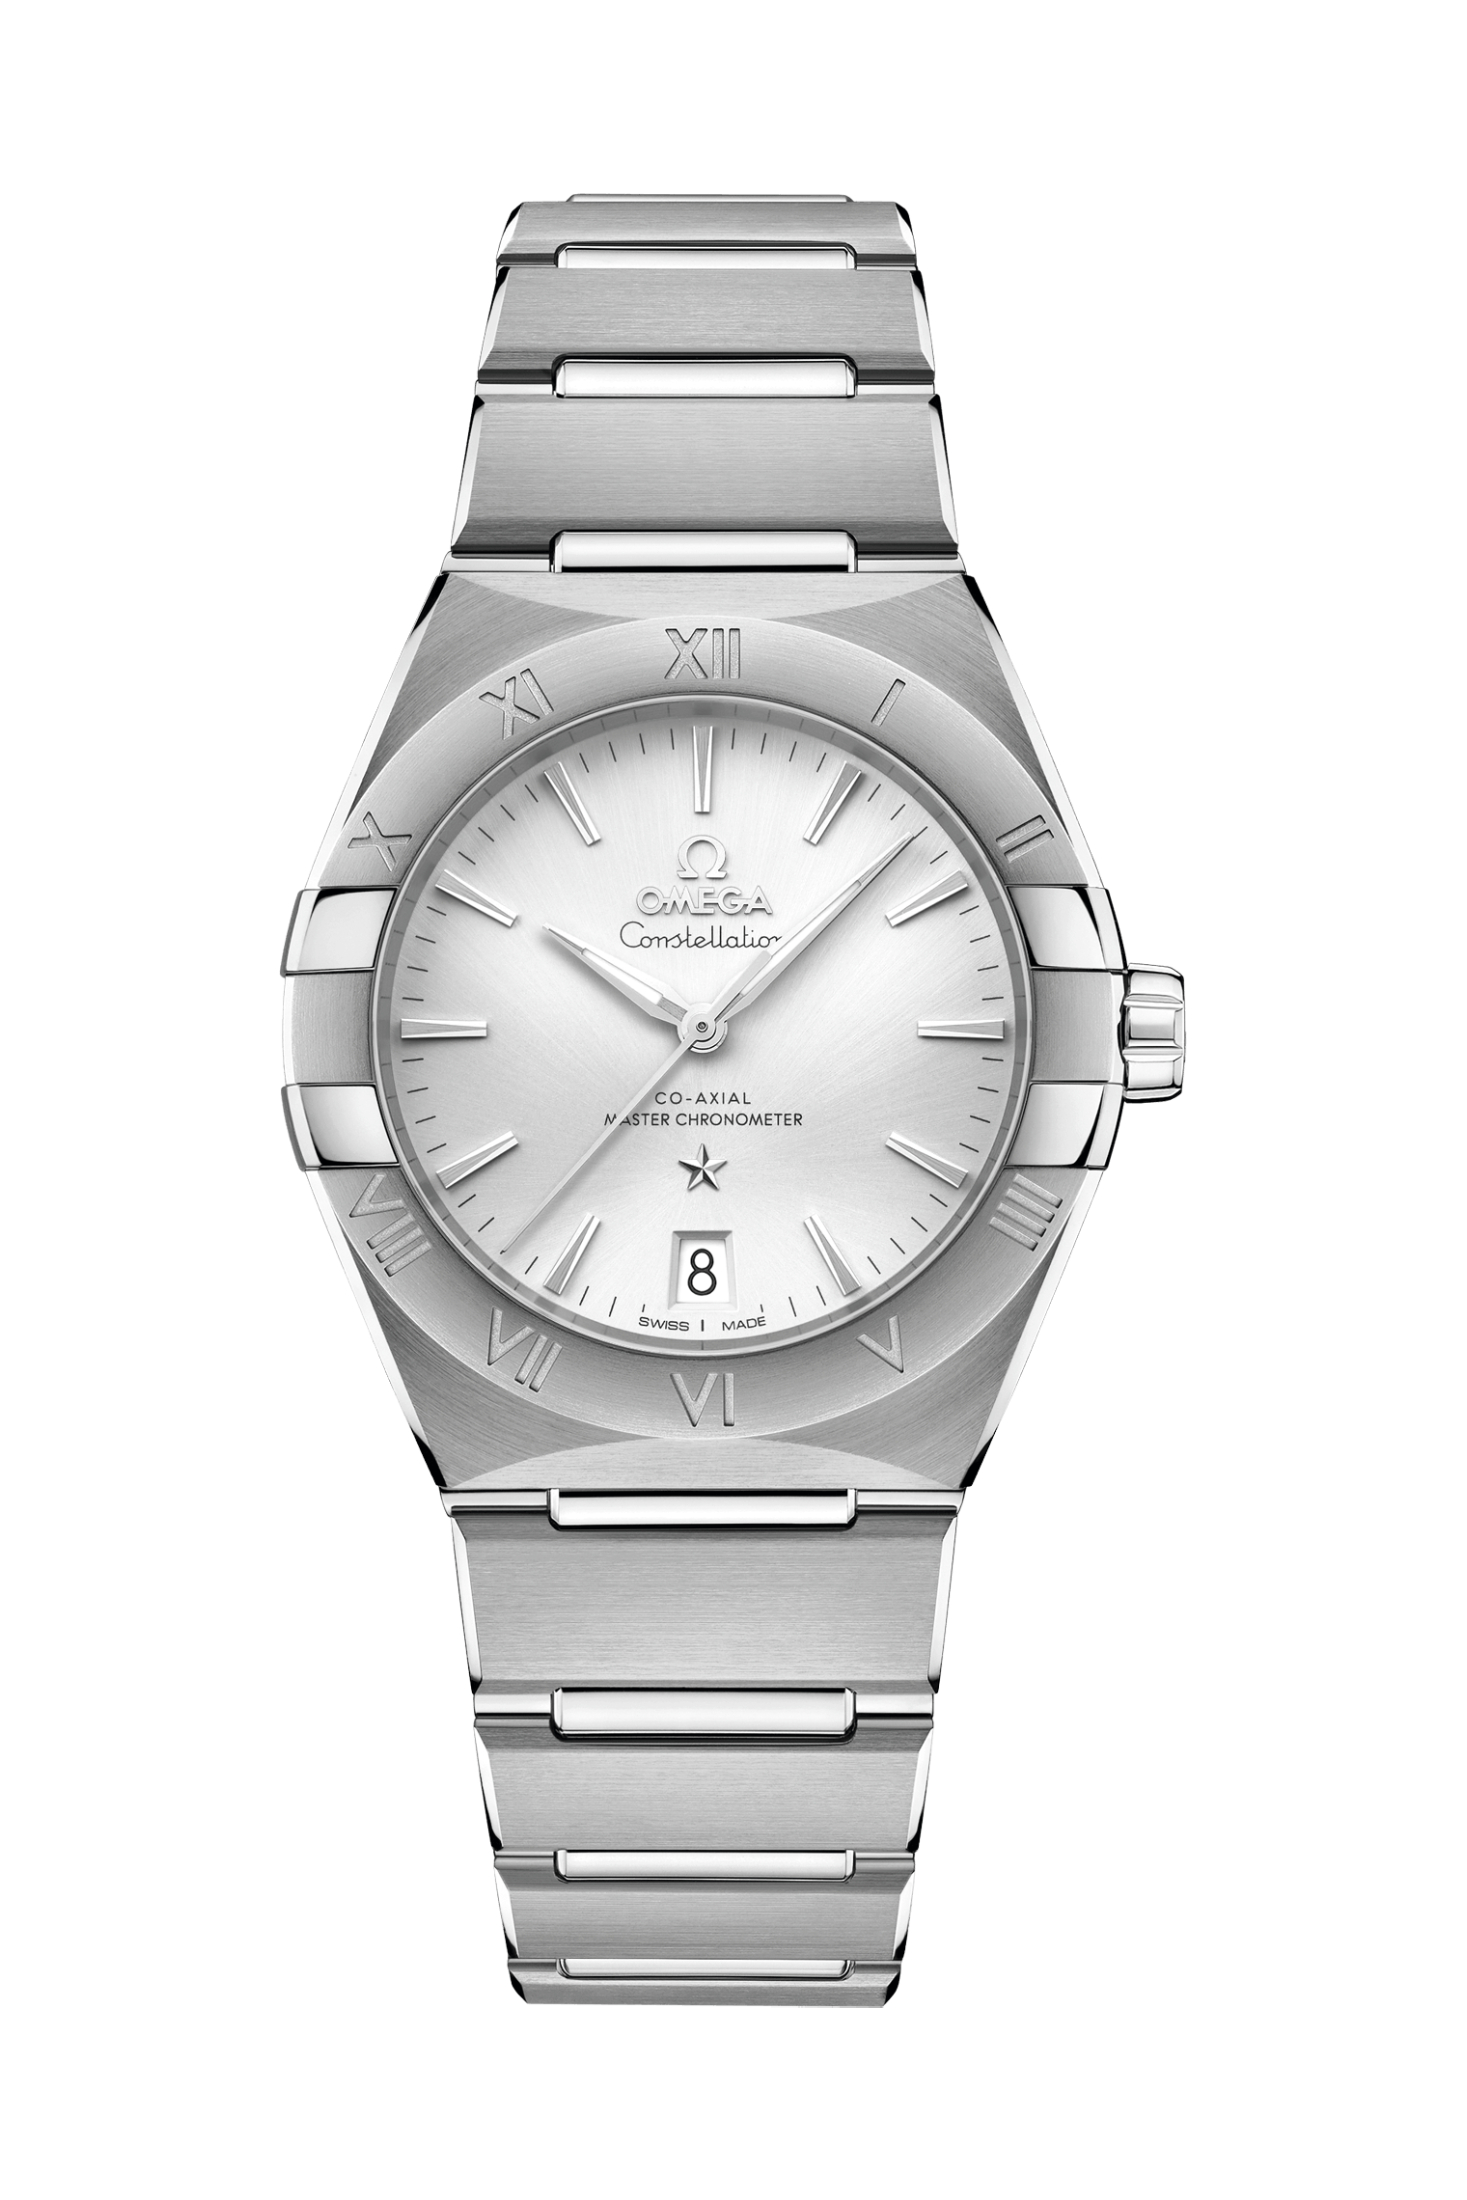 Ladies' watch  OMEGA, Constellation Co Axial Master Chronometer / 36mm, SKU: 131.10.36.20.02.001 | watchapproach.com